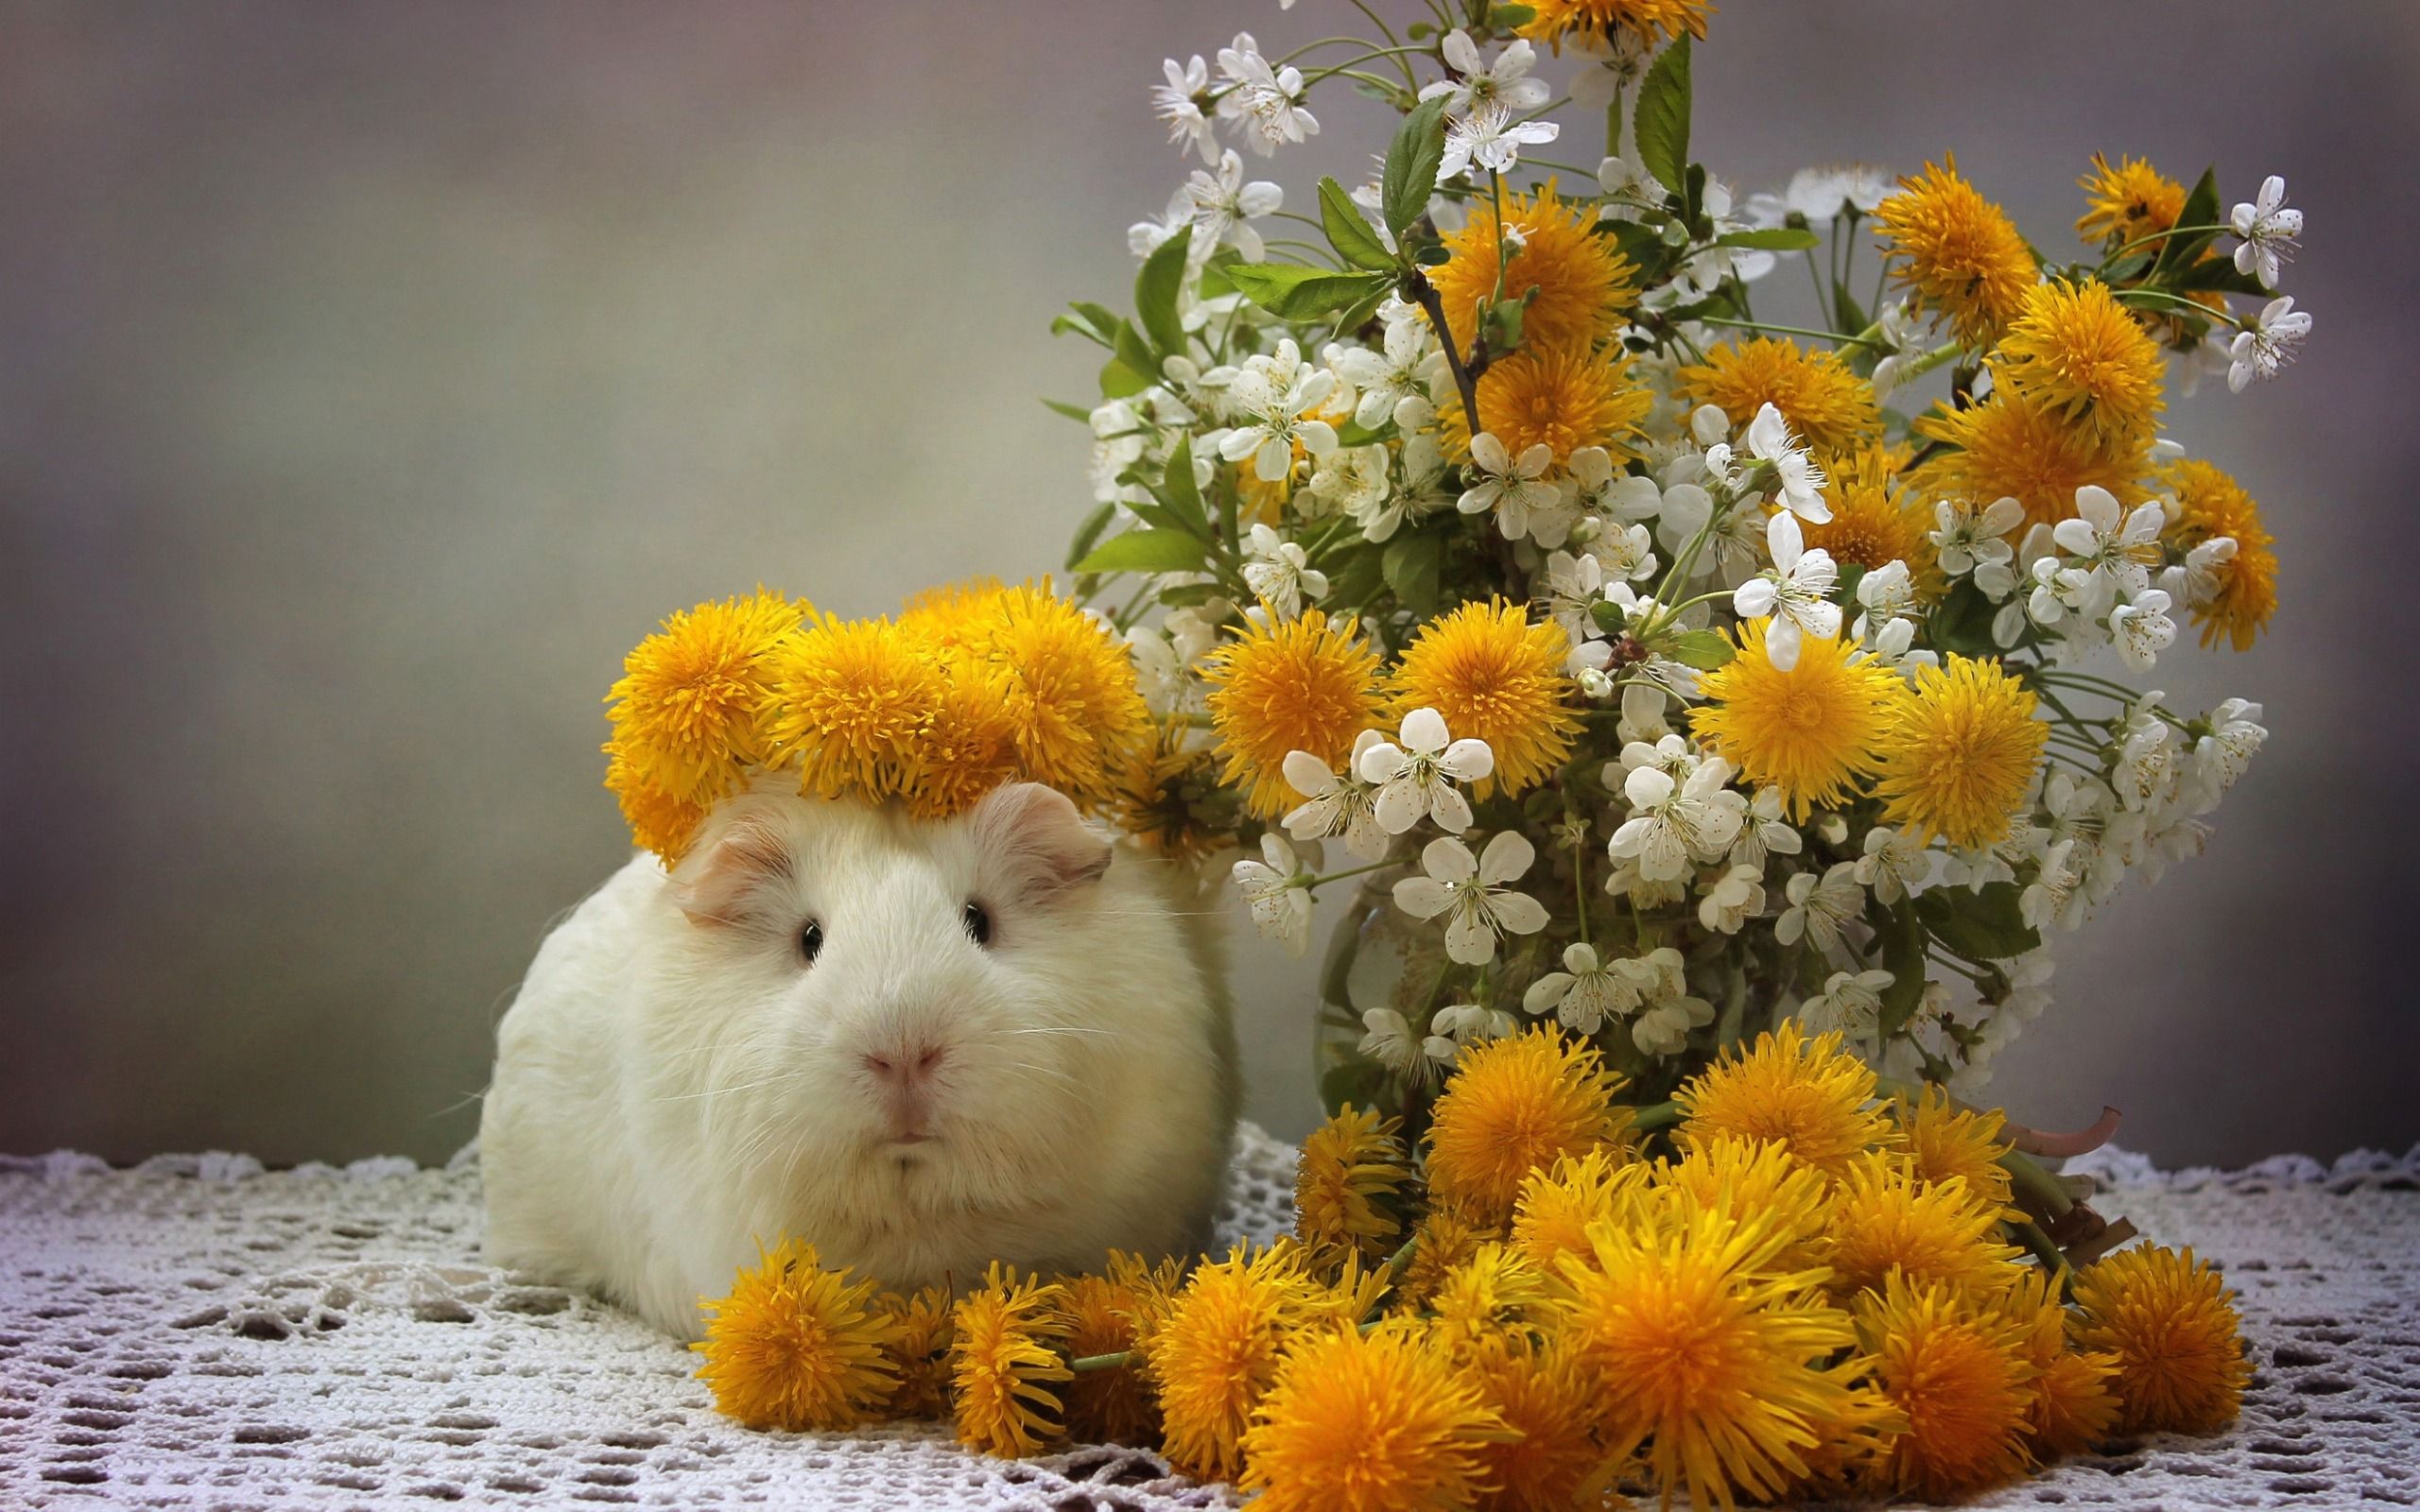 Download wallpaper white little guinea pig, cute animals, pets, dandelions, yellow spring flowers for desktop with resolution 2560x1600. High Quality HD picture wallpaper